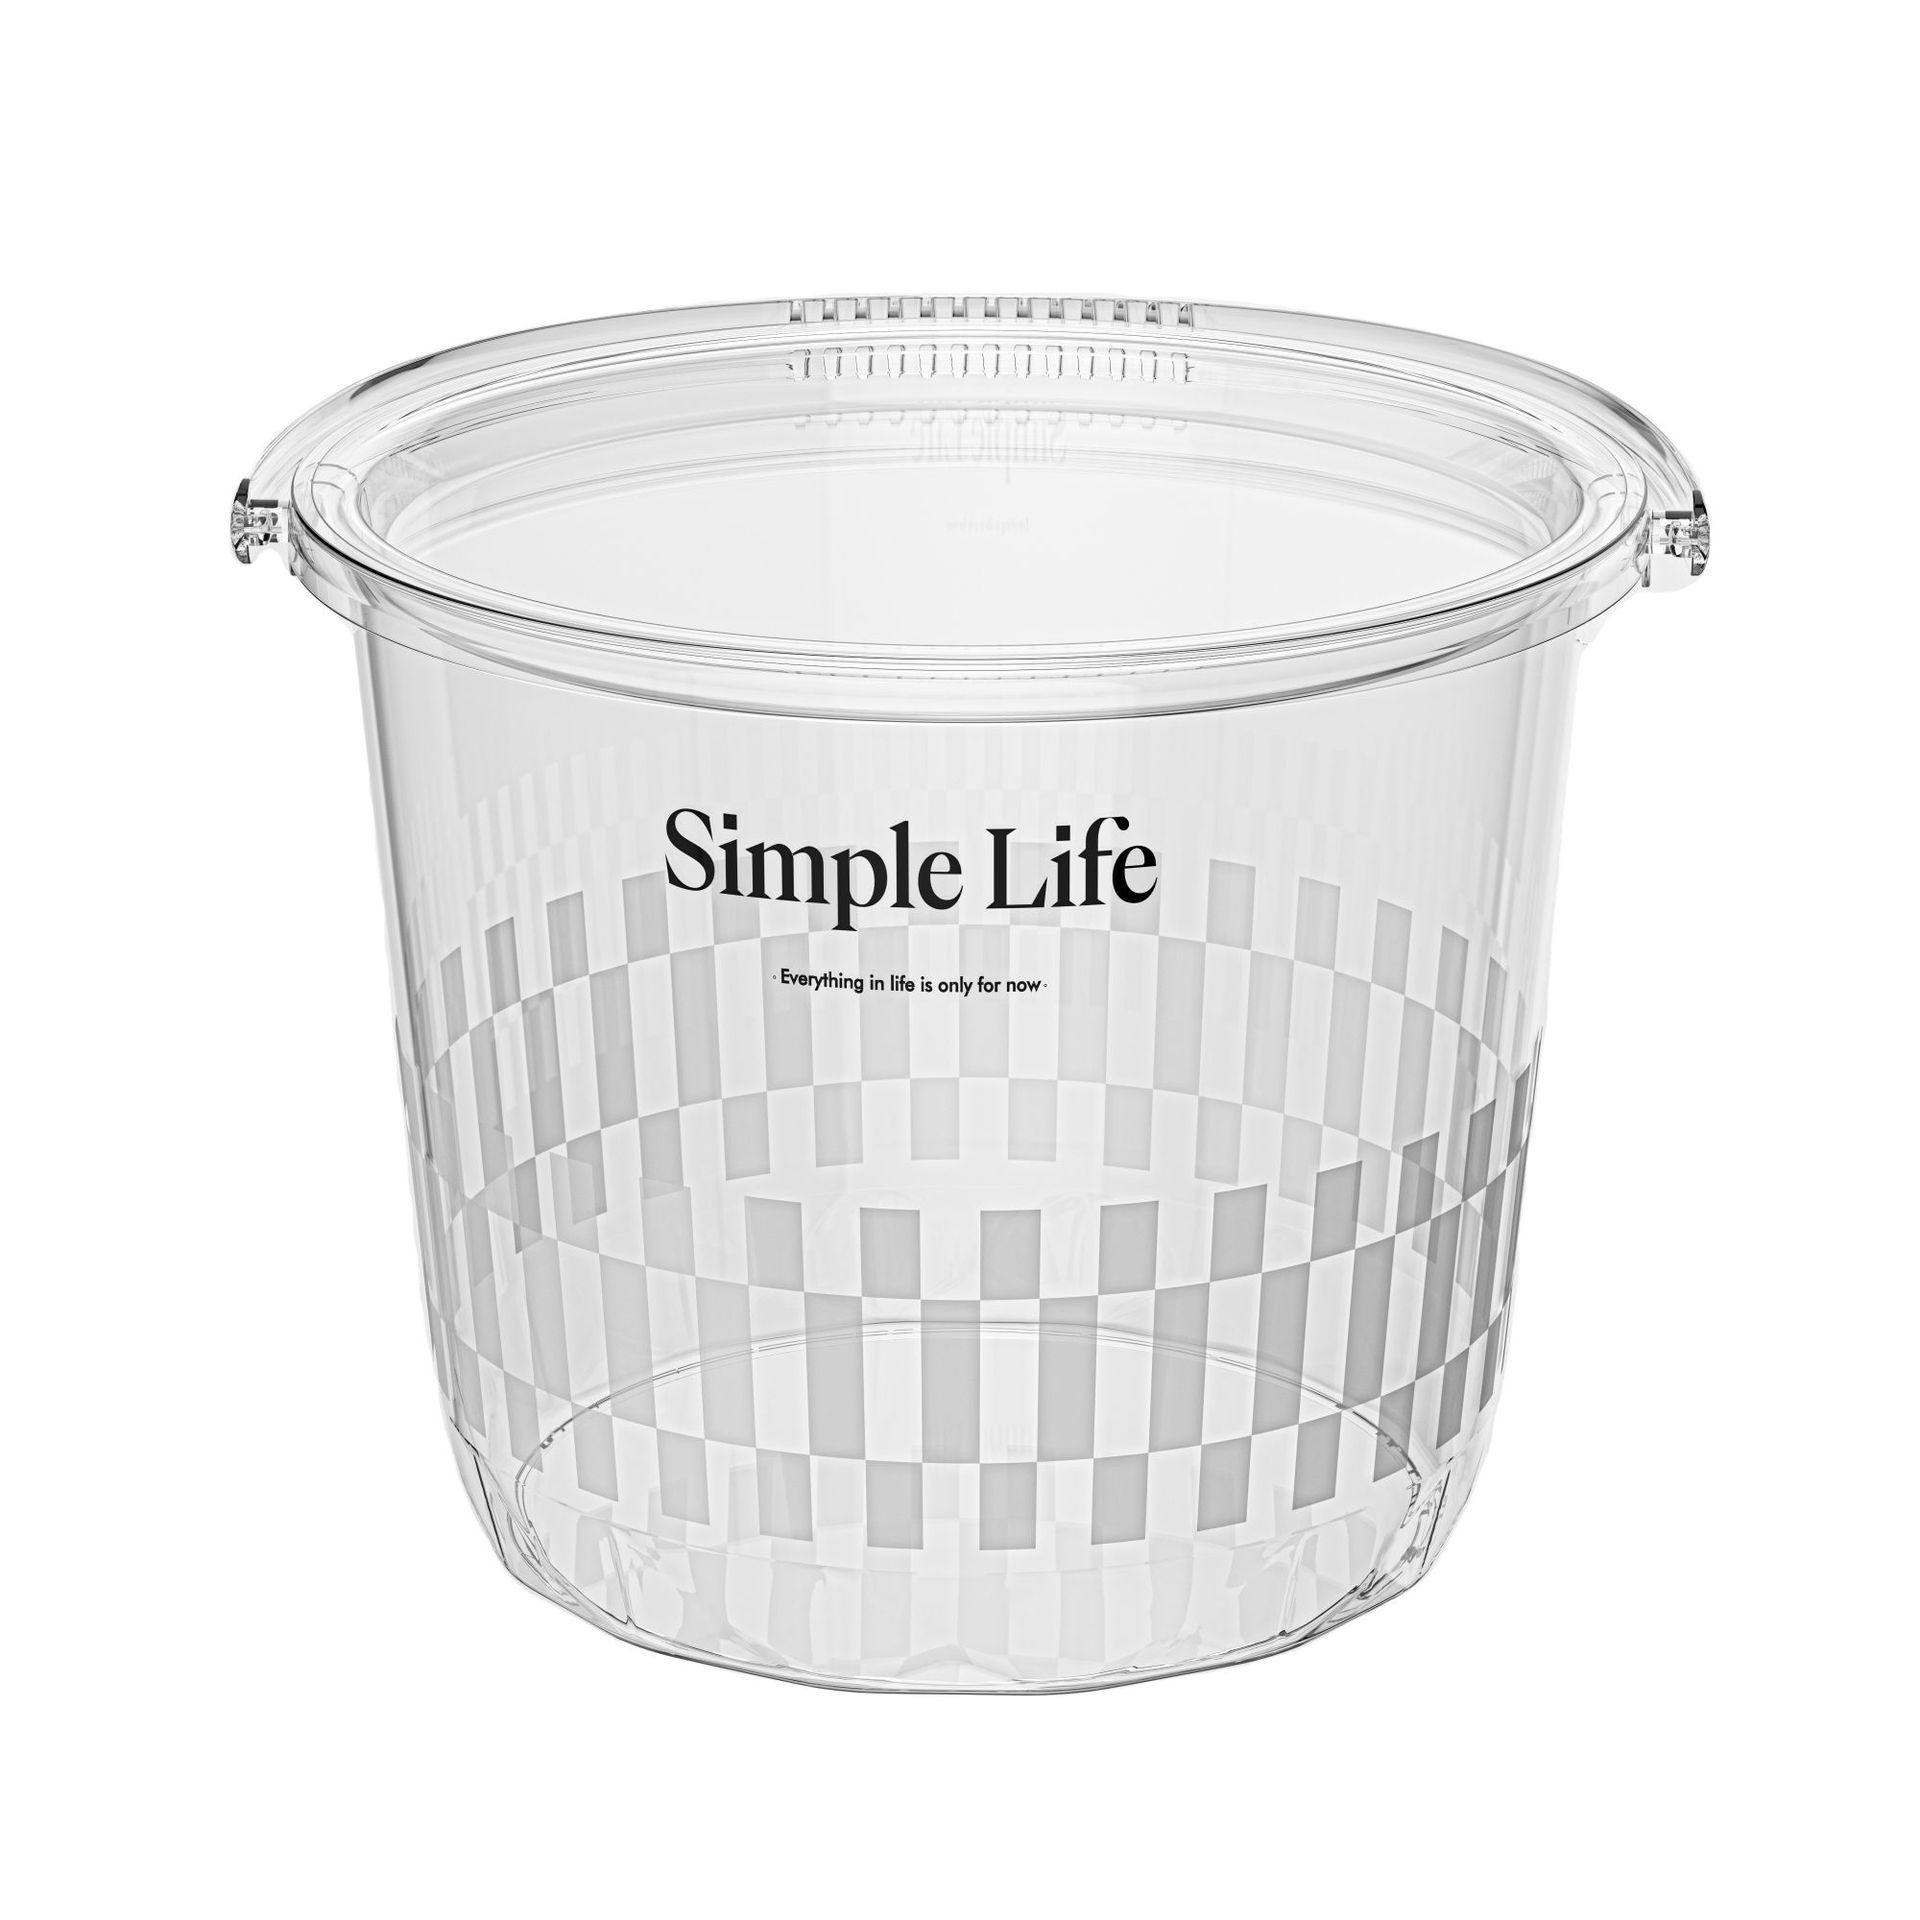 Hl Bucket Household Water Storage Thick Plastic Bucket Laundry Portable Small Bucket Student Dormitory Light Luxury Clear with Cover